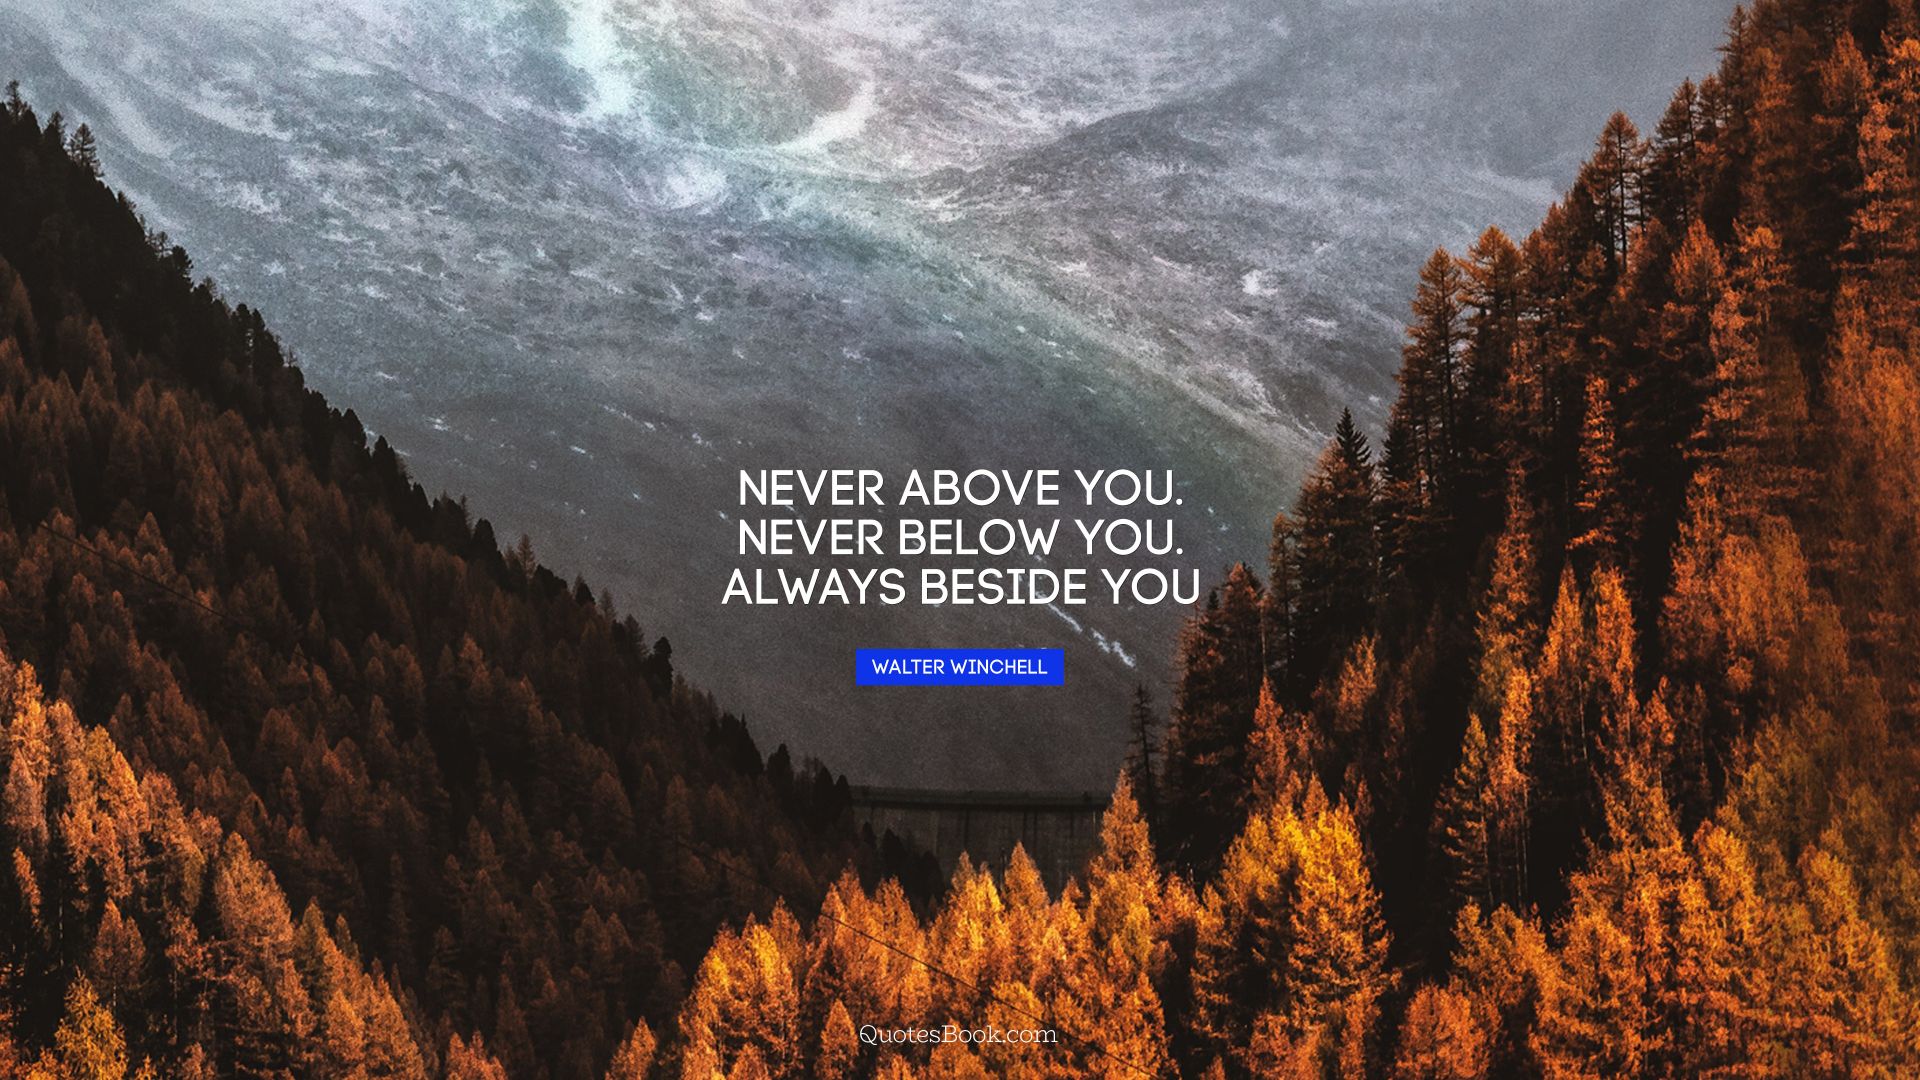 Never above you. Never below you. Always beside you. - Quote by Walter Winchell